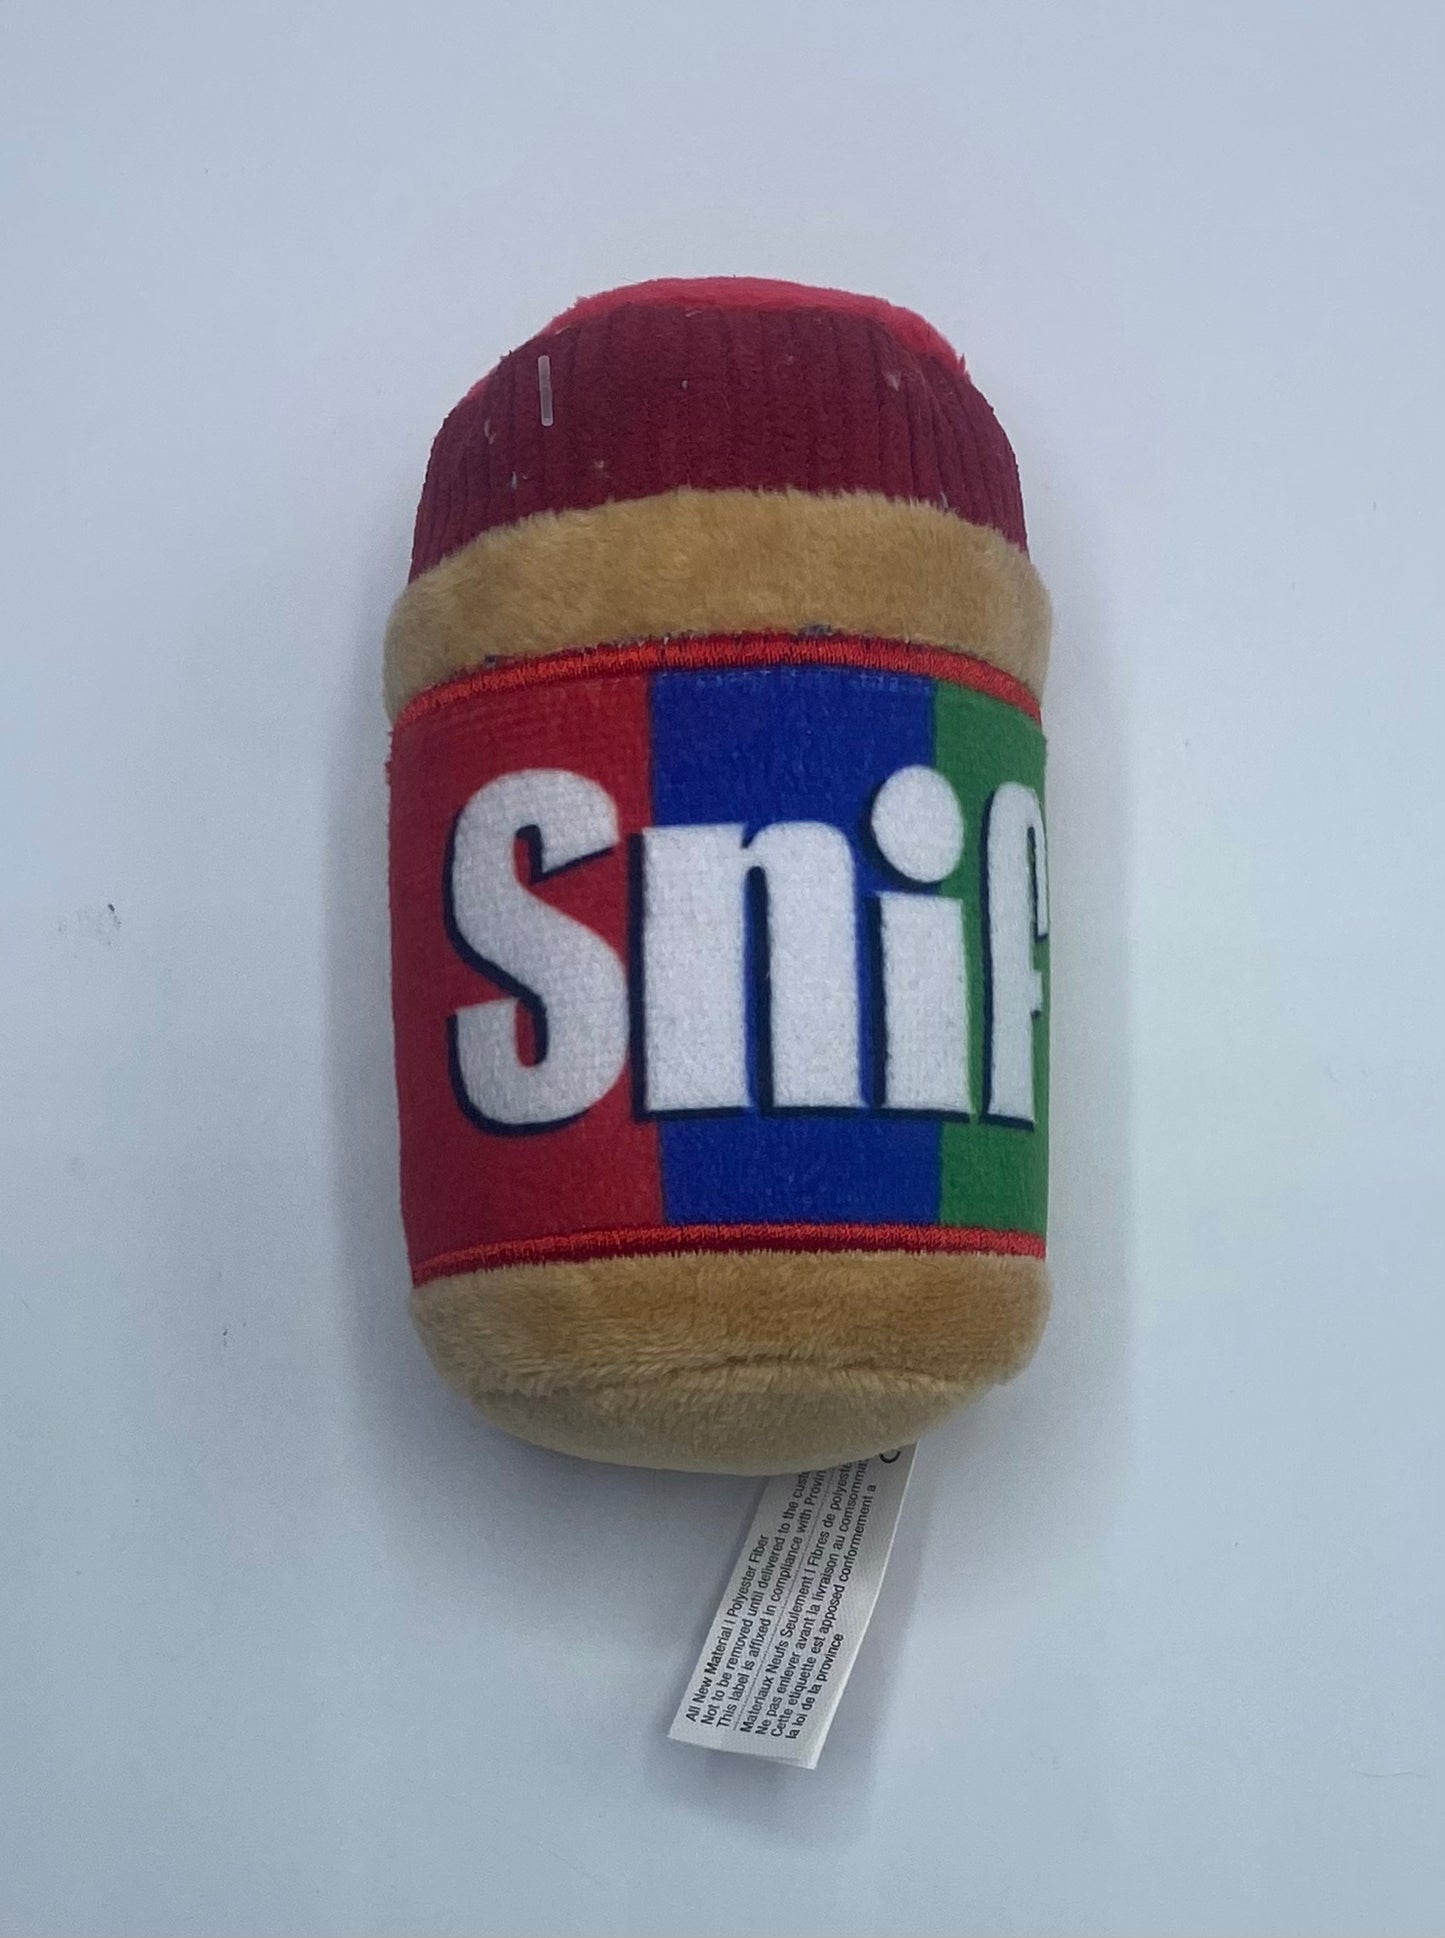 Snif Peanut butter dog toy